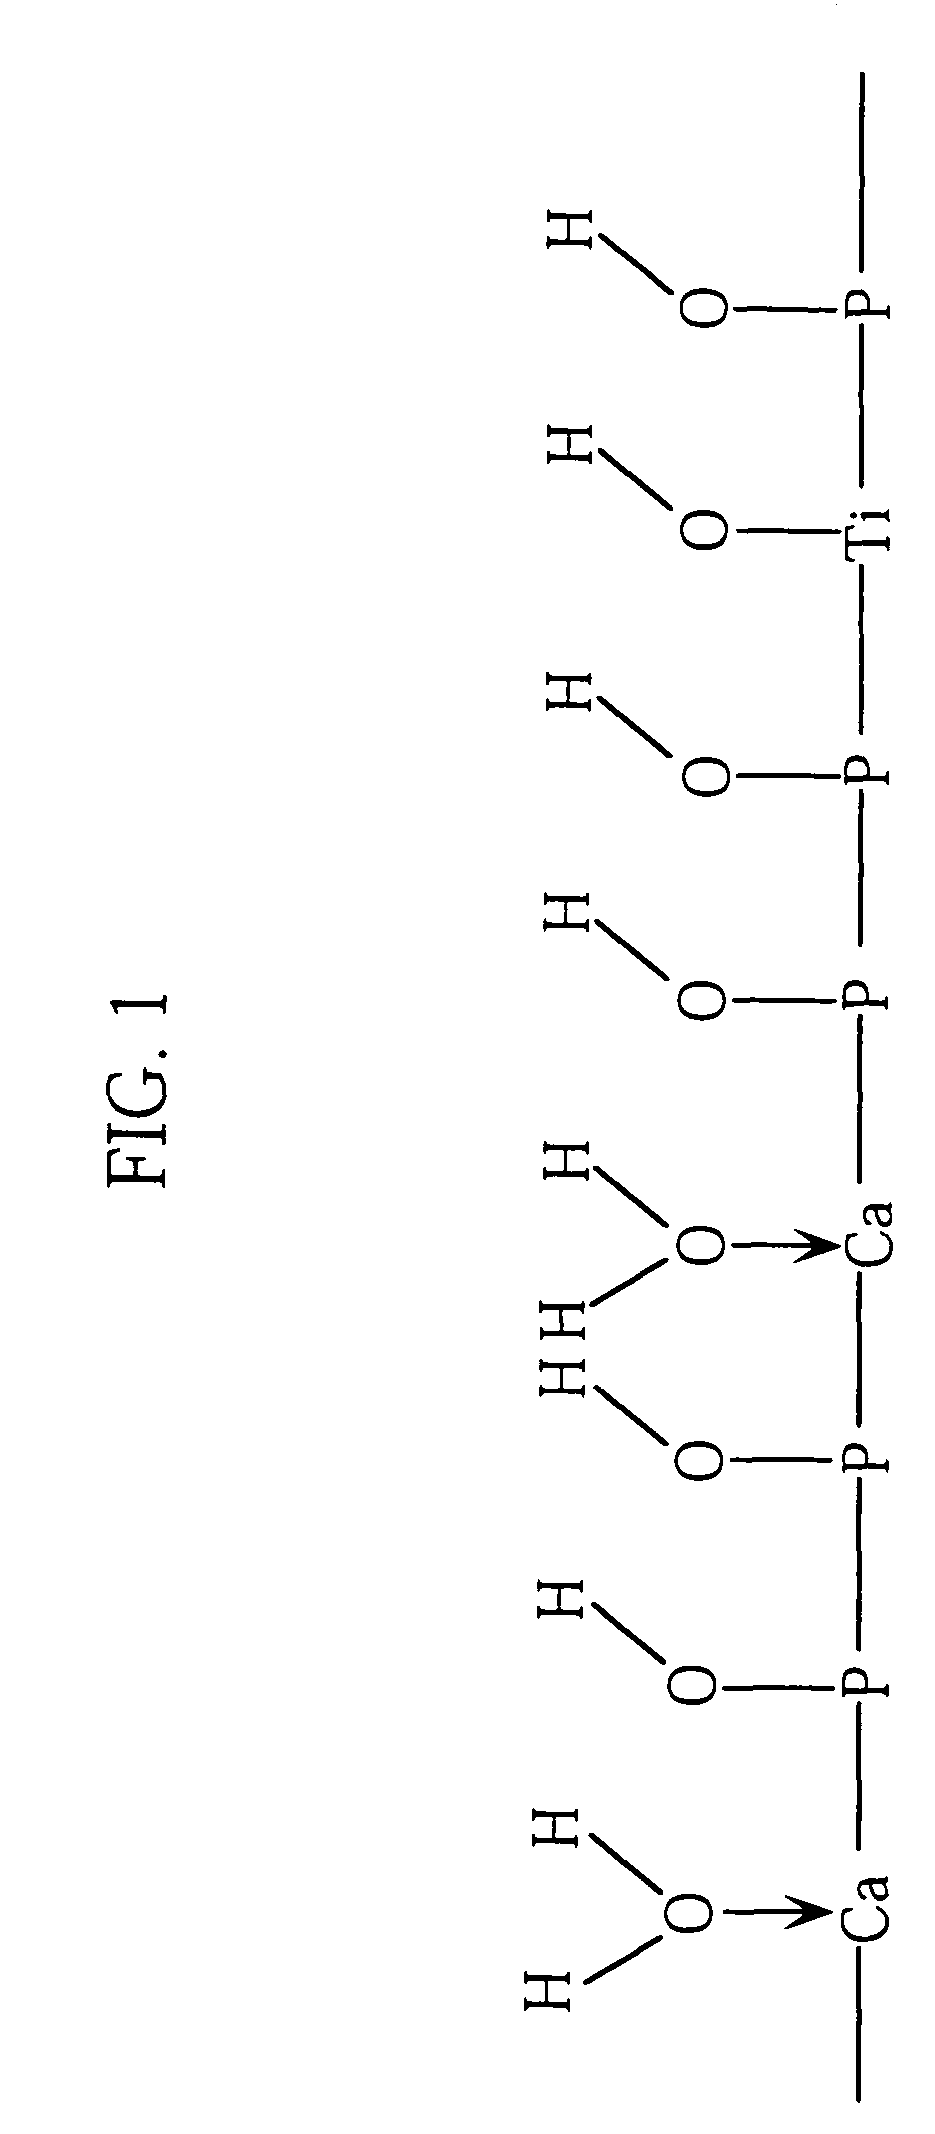 Agricultural chemical component and decomposer for residual agricultural chemical